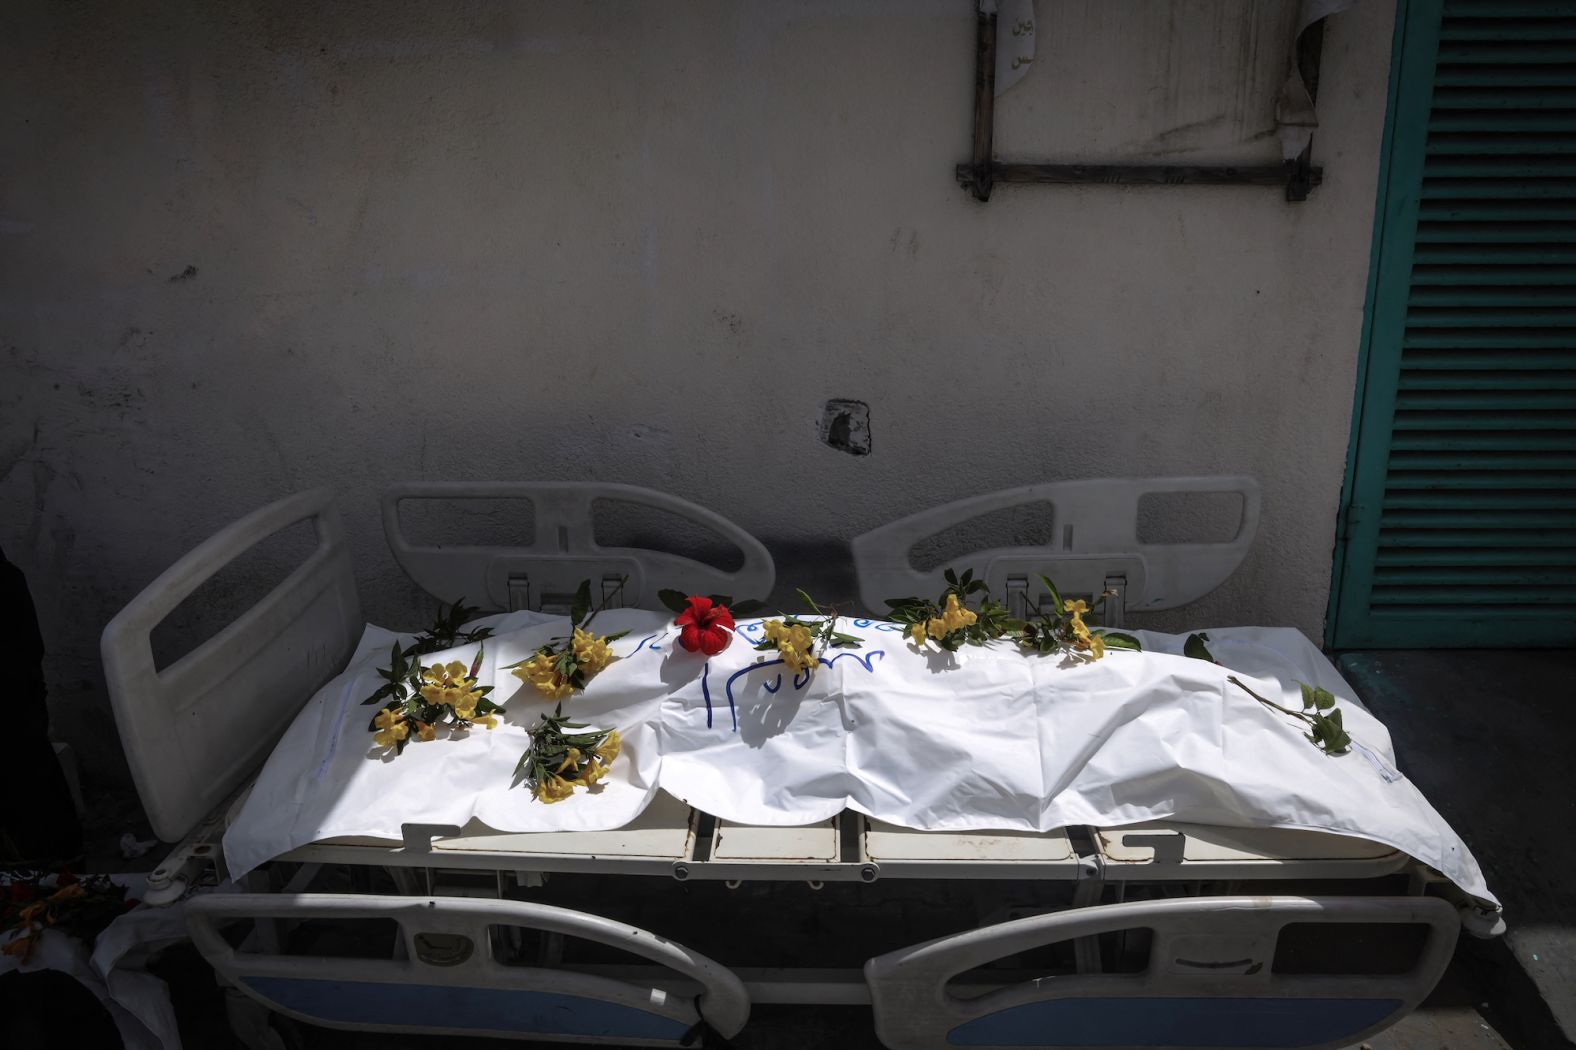 A body unearthed at Nasser Hospital is set on a stretcher and covered with flowers before being buried in Khan Younis, Gaza, on Tuesday, April 23. <a href="index.php?page=&url=https%3A%2F%2Fwww.cnn.com%2F2024%2F04%2F25%2Fmiddleeast%2Fgaza-400-bodies-mass-grave-hospital-intl%2Findex.html" target="_blank">Nearly 400 bodies have been found in mass graves at the hospital</a> following Israeli troops' withdrawal from the area earlier this month, the Palestinian Civil Defense in Gaza said on Thursday. The Israel Defense Forces has said any suggestion that it buried Palestinian bodies in mass graves was false, and that a grave at the Nasser complex was dug by Palestinians in Gaza some months ago.